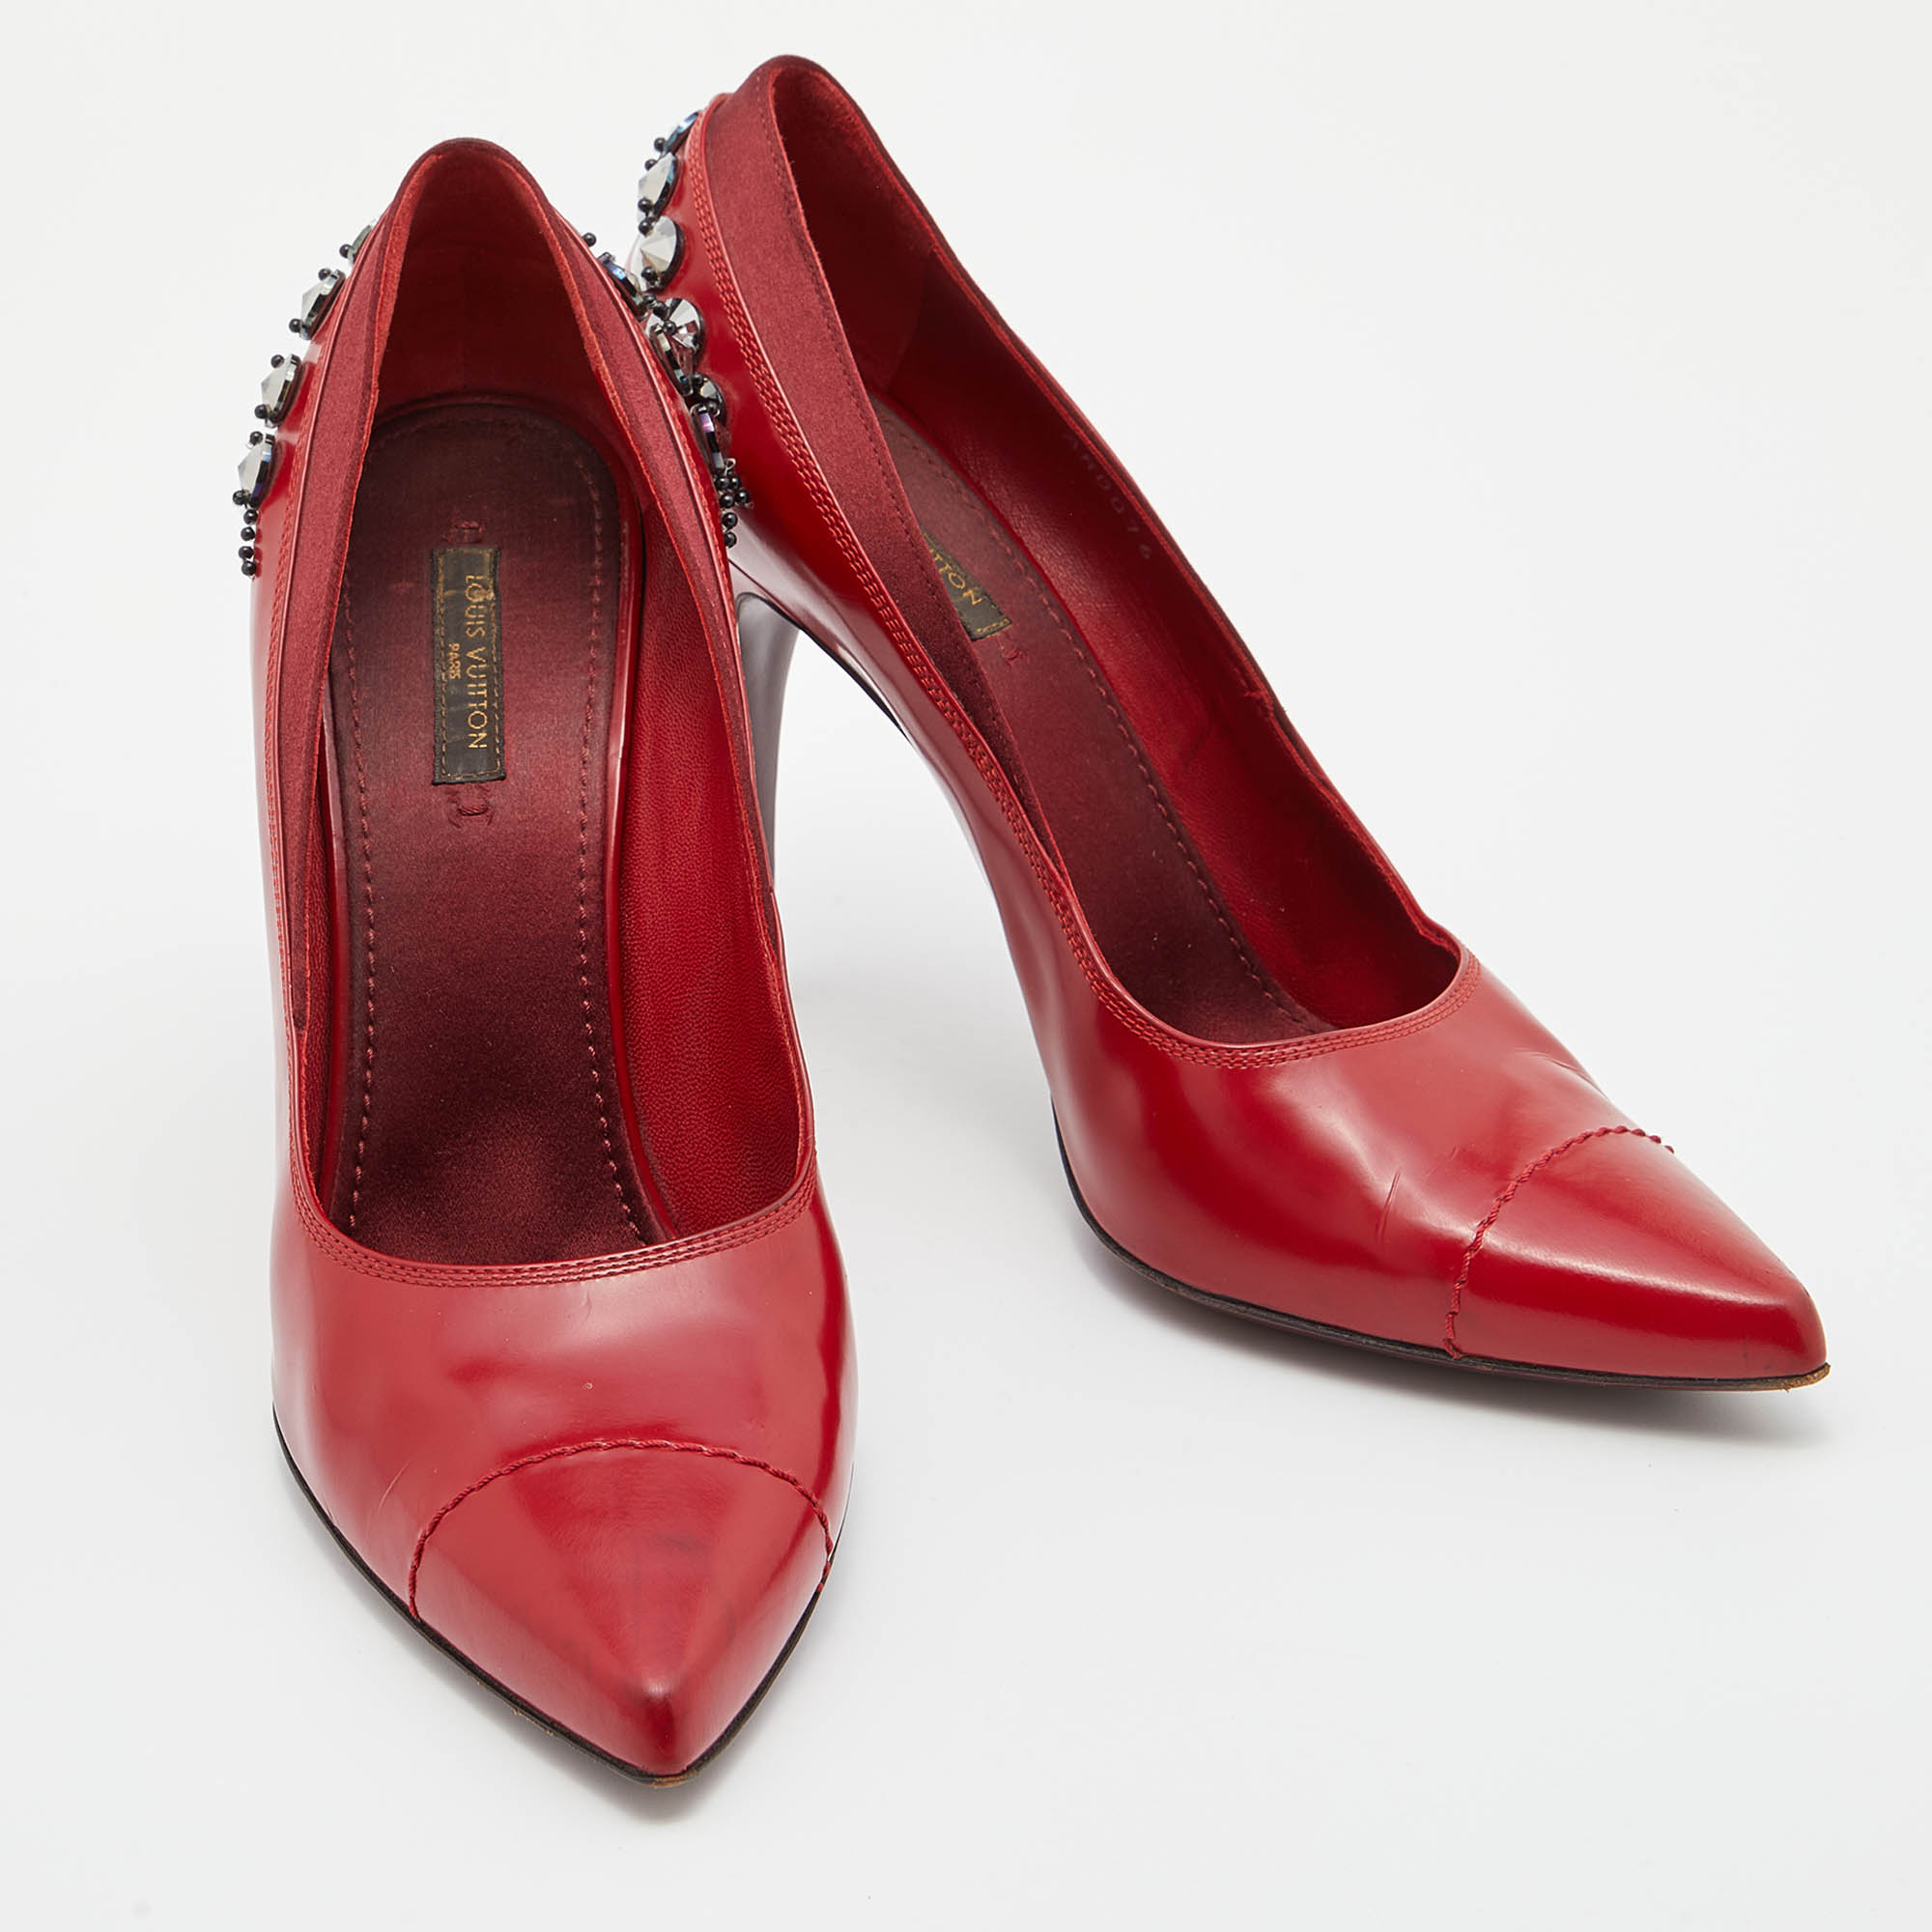 Louis Vuitton Red Leather And Satin Crystal Embellished Pumps Size 39